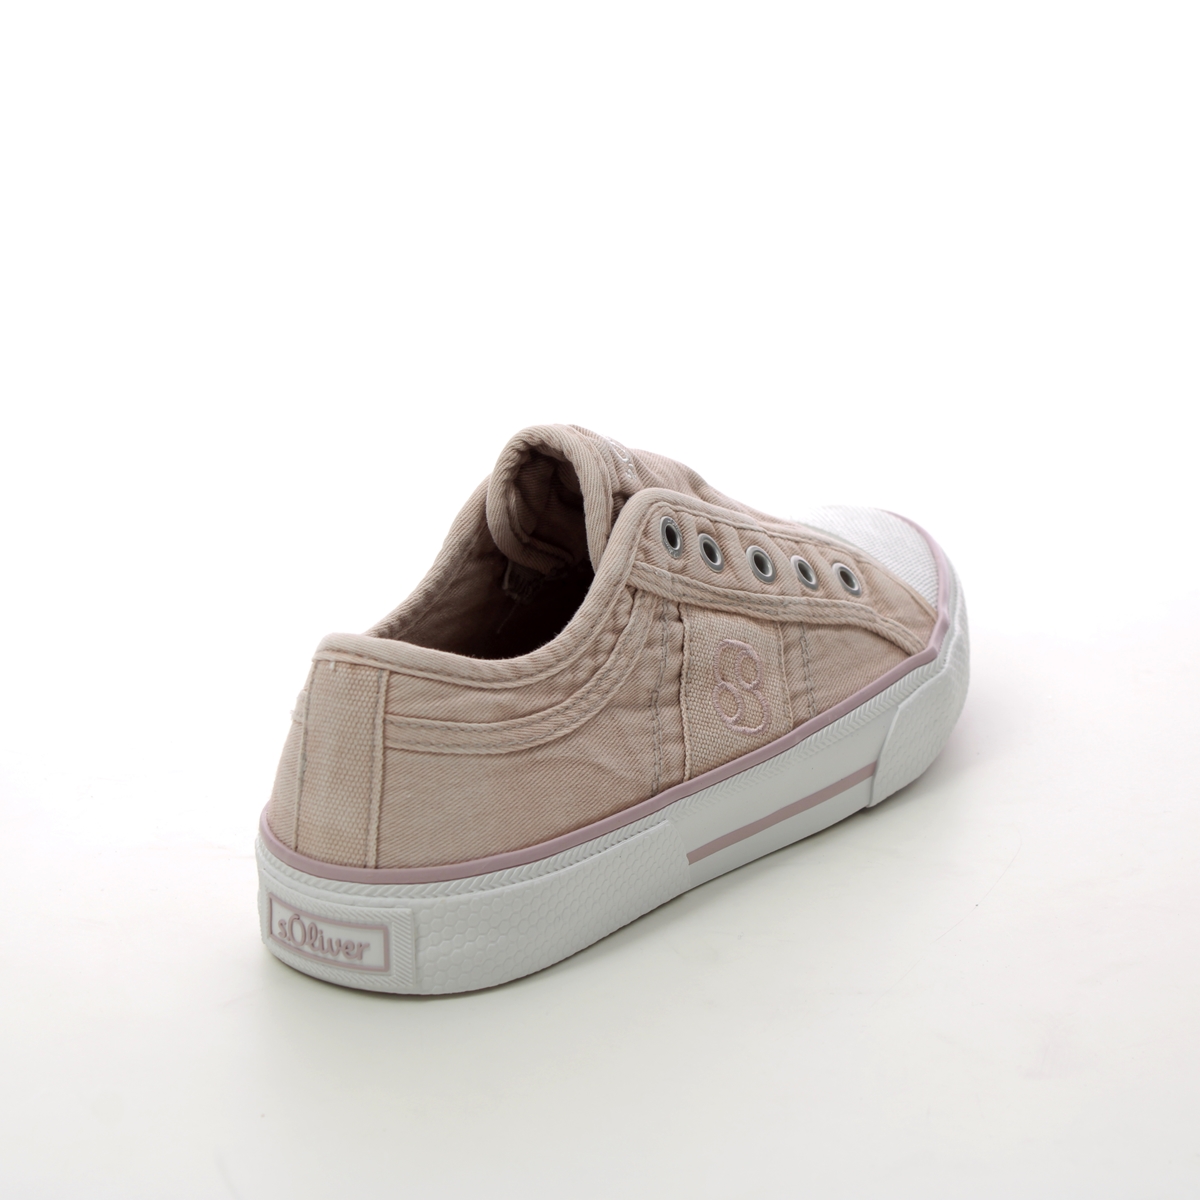 S Oliver 24635-30544 Womens pink trainers Mustang 31 Rose